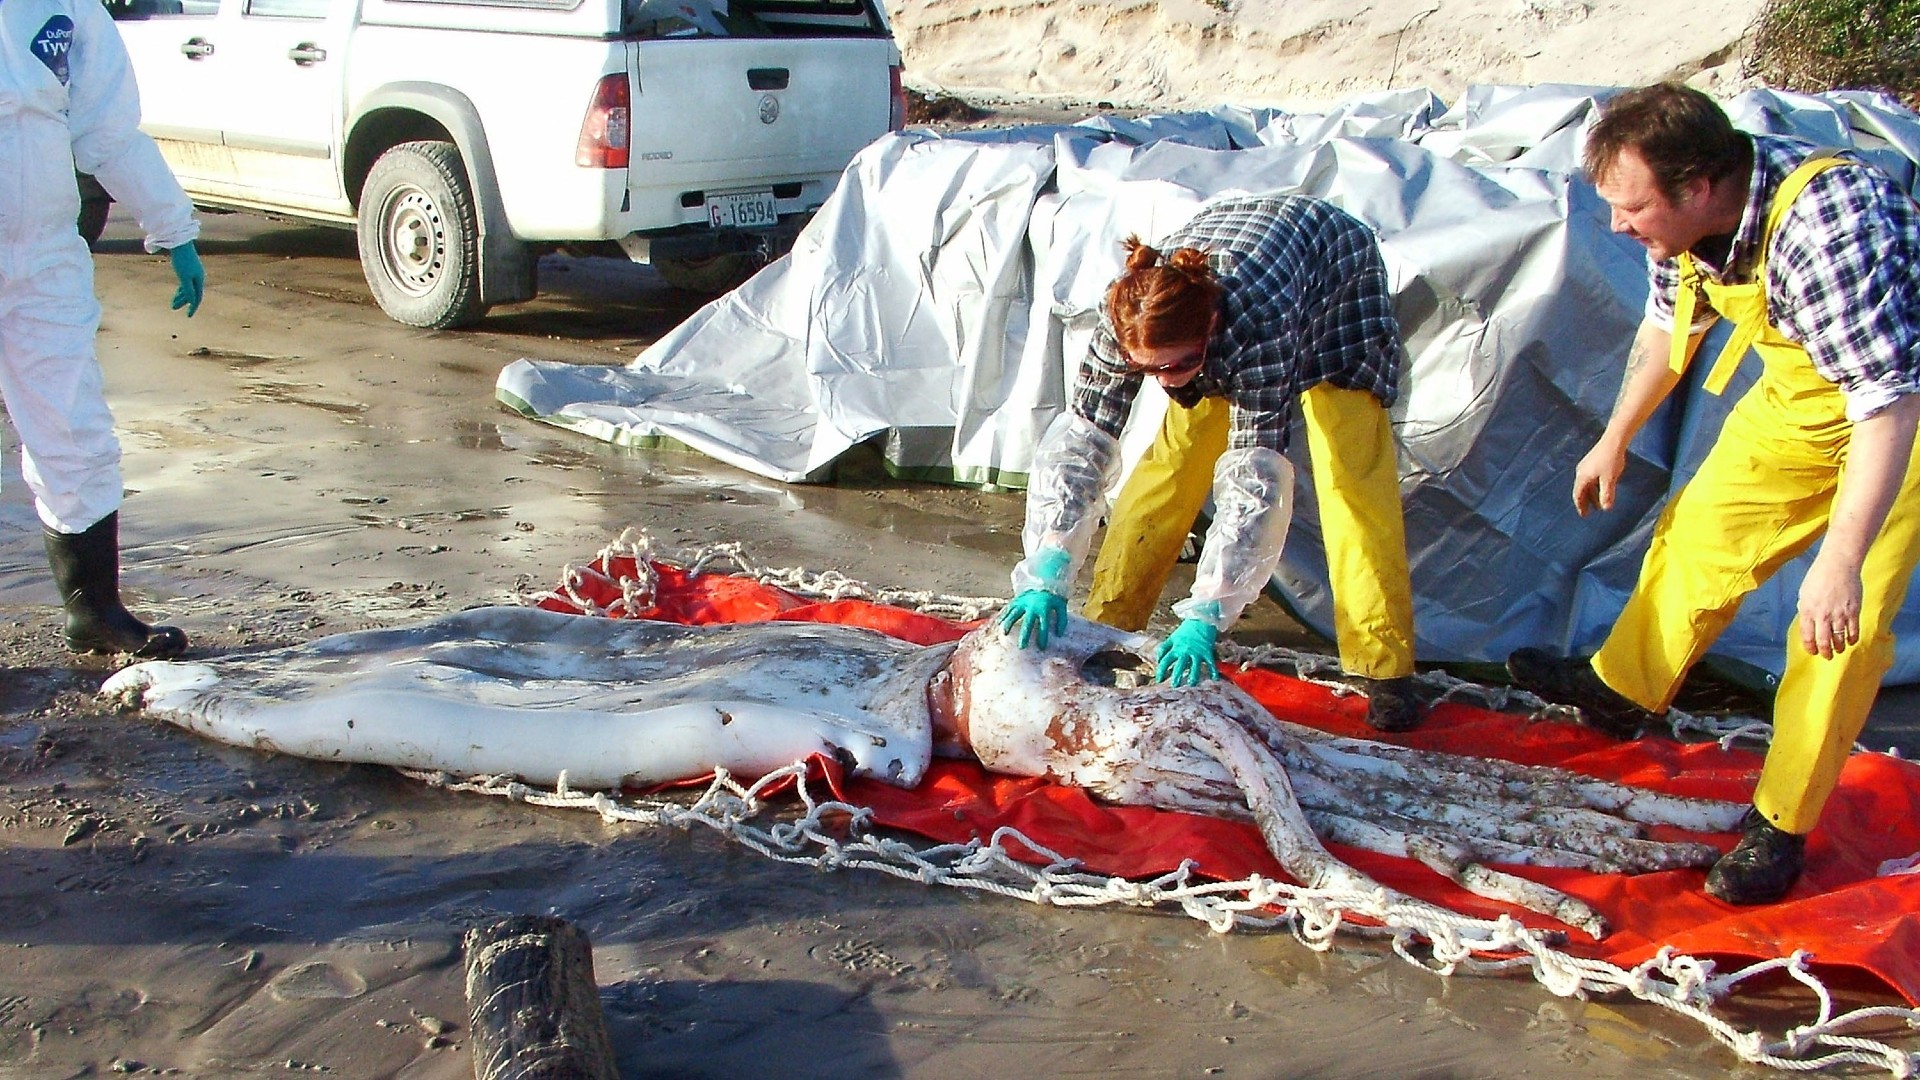 Giant Squid washed up in Tasmania, July 10, 2007. Handout via Getty Images.